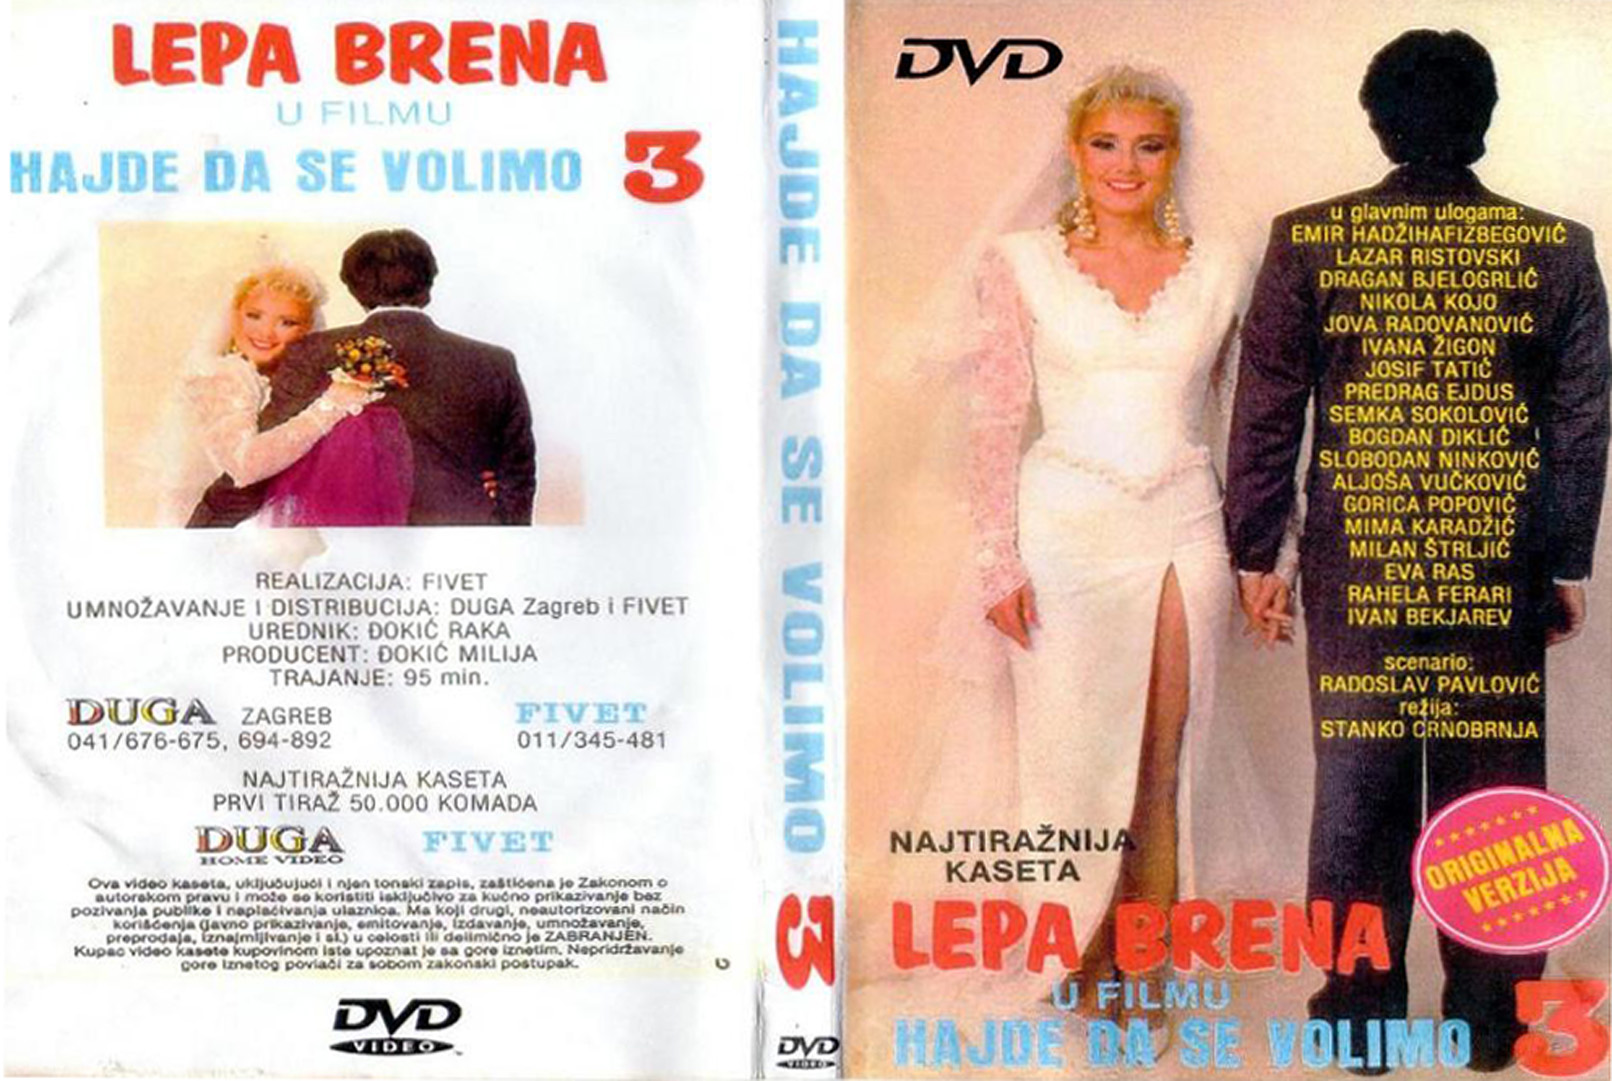 Click to view full size image -  DVD Cover - H - DVD - HAJDE DA SE VOLIMO 3 - DVD - HAJDE DA SE VOLIMO 3.jpg